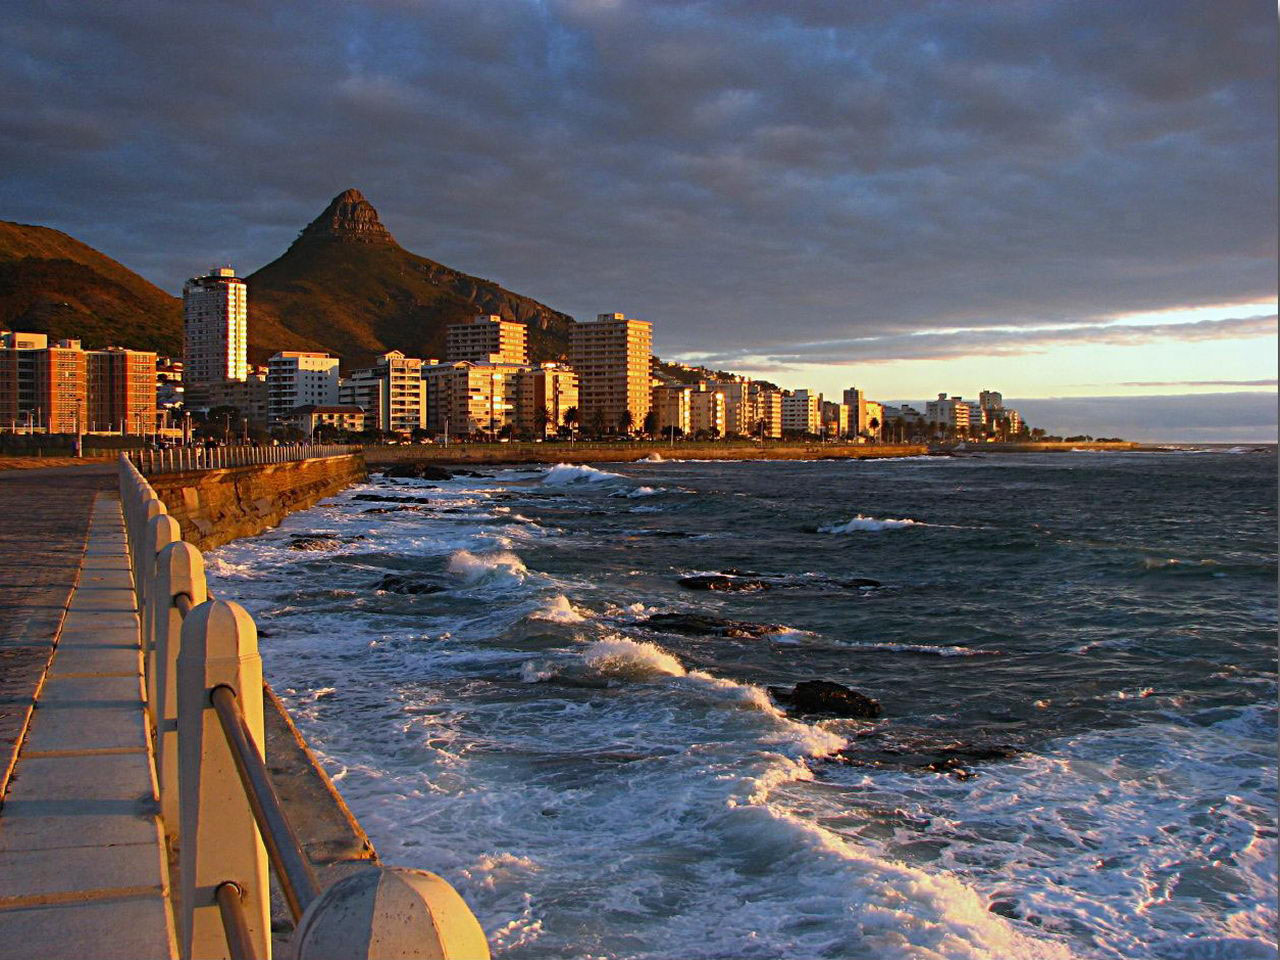 Free download south africa cape town desktop wallpaper wallpapers stunning hd waves x for your desktop mobile tablet explore africa wallpaper desktop africa map wallpaper africa wallpaper south africa wallpaper